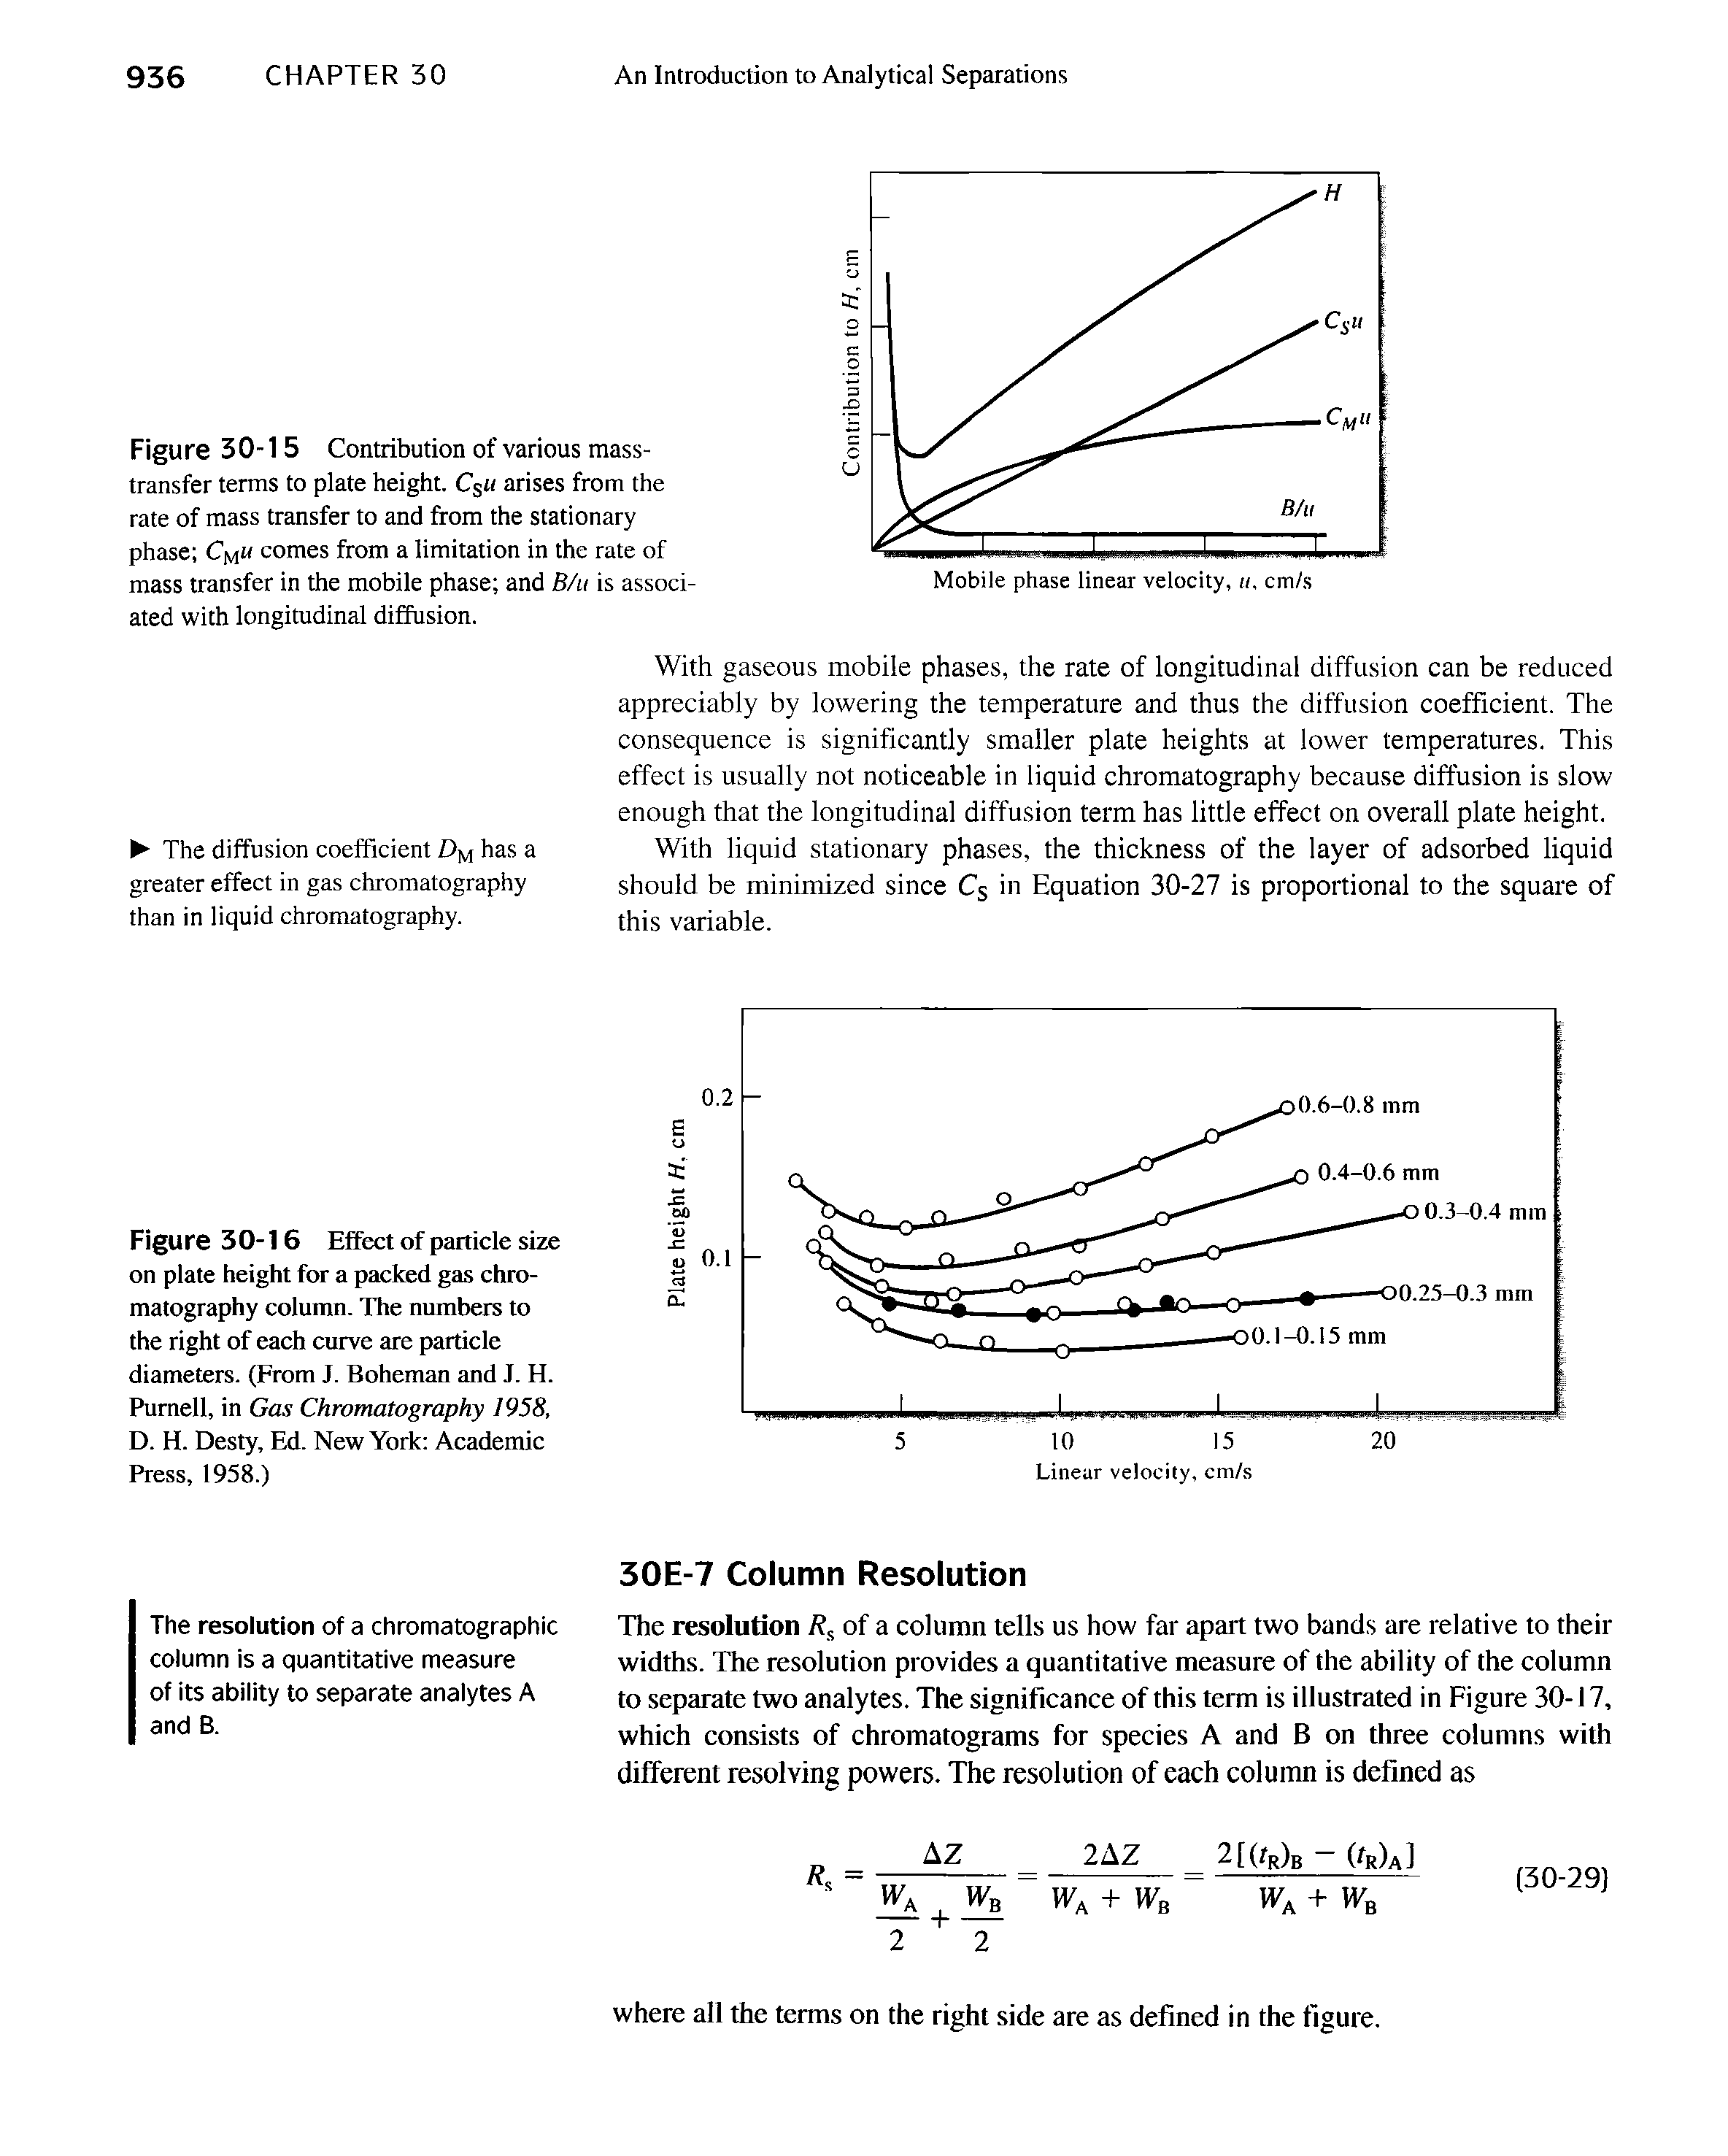 Figure 30-1 5 Contribution of various mass-transfer terms to plate height. Cgu arises from the rate of mass transfer to and from the stationary phase comes from a limitation in the rate of mass transfer in the mobile phase and B/u is associated with longitudinal diffusion.